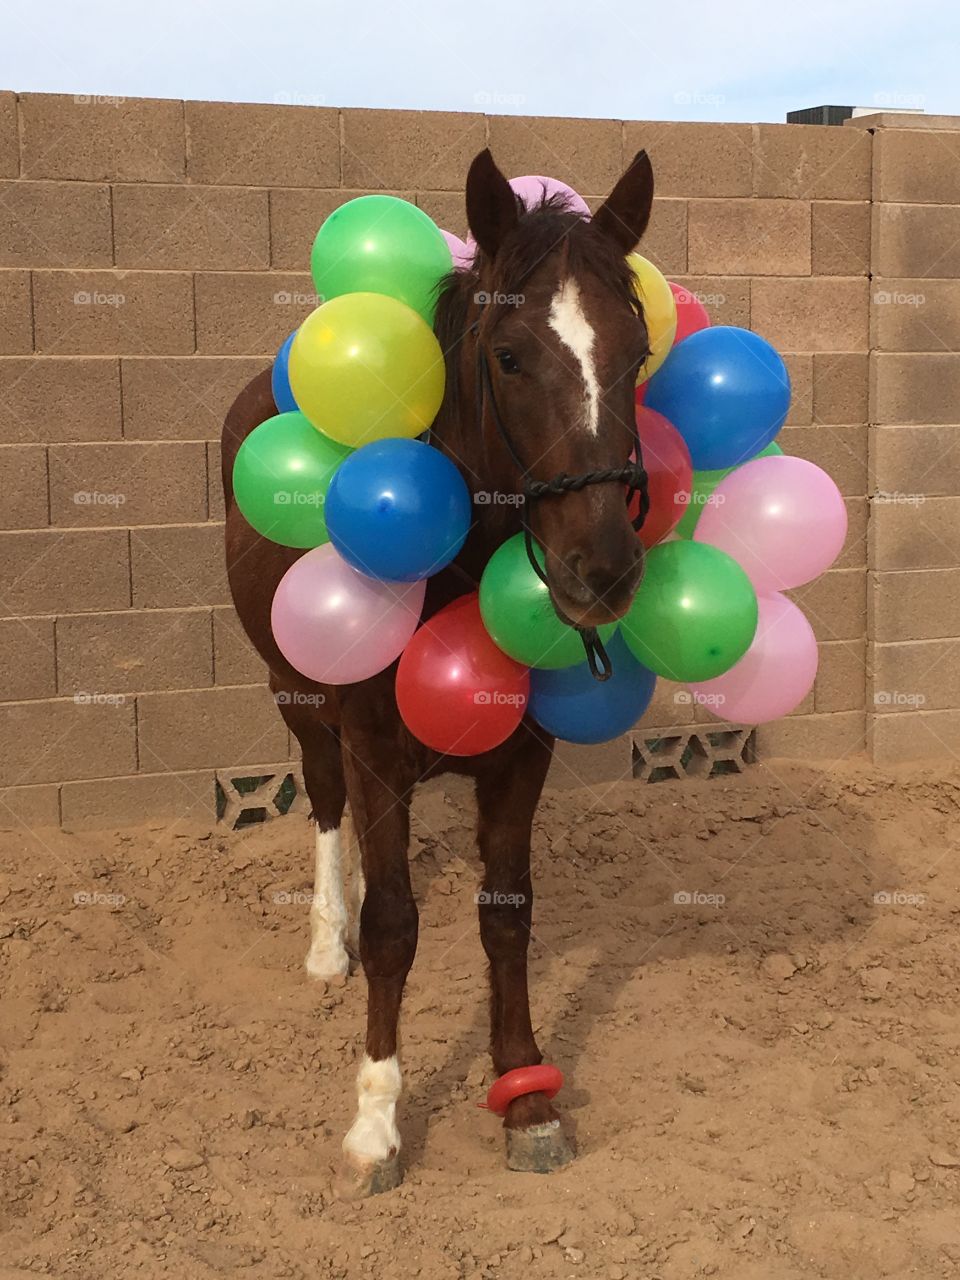 Doc BLM Mustang and Balloons